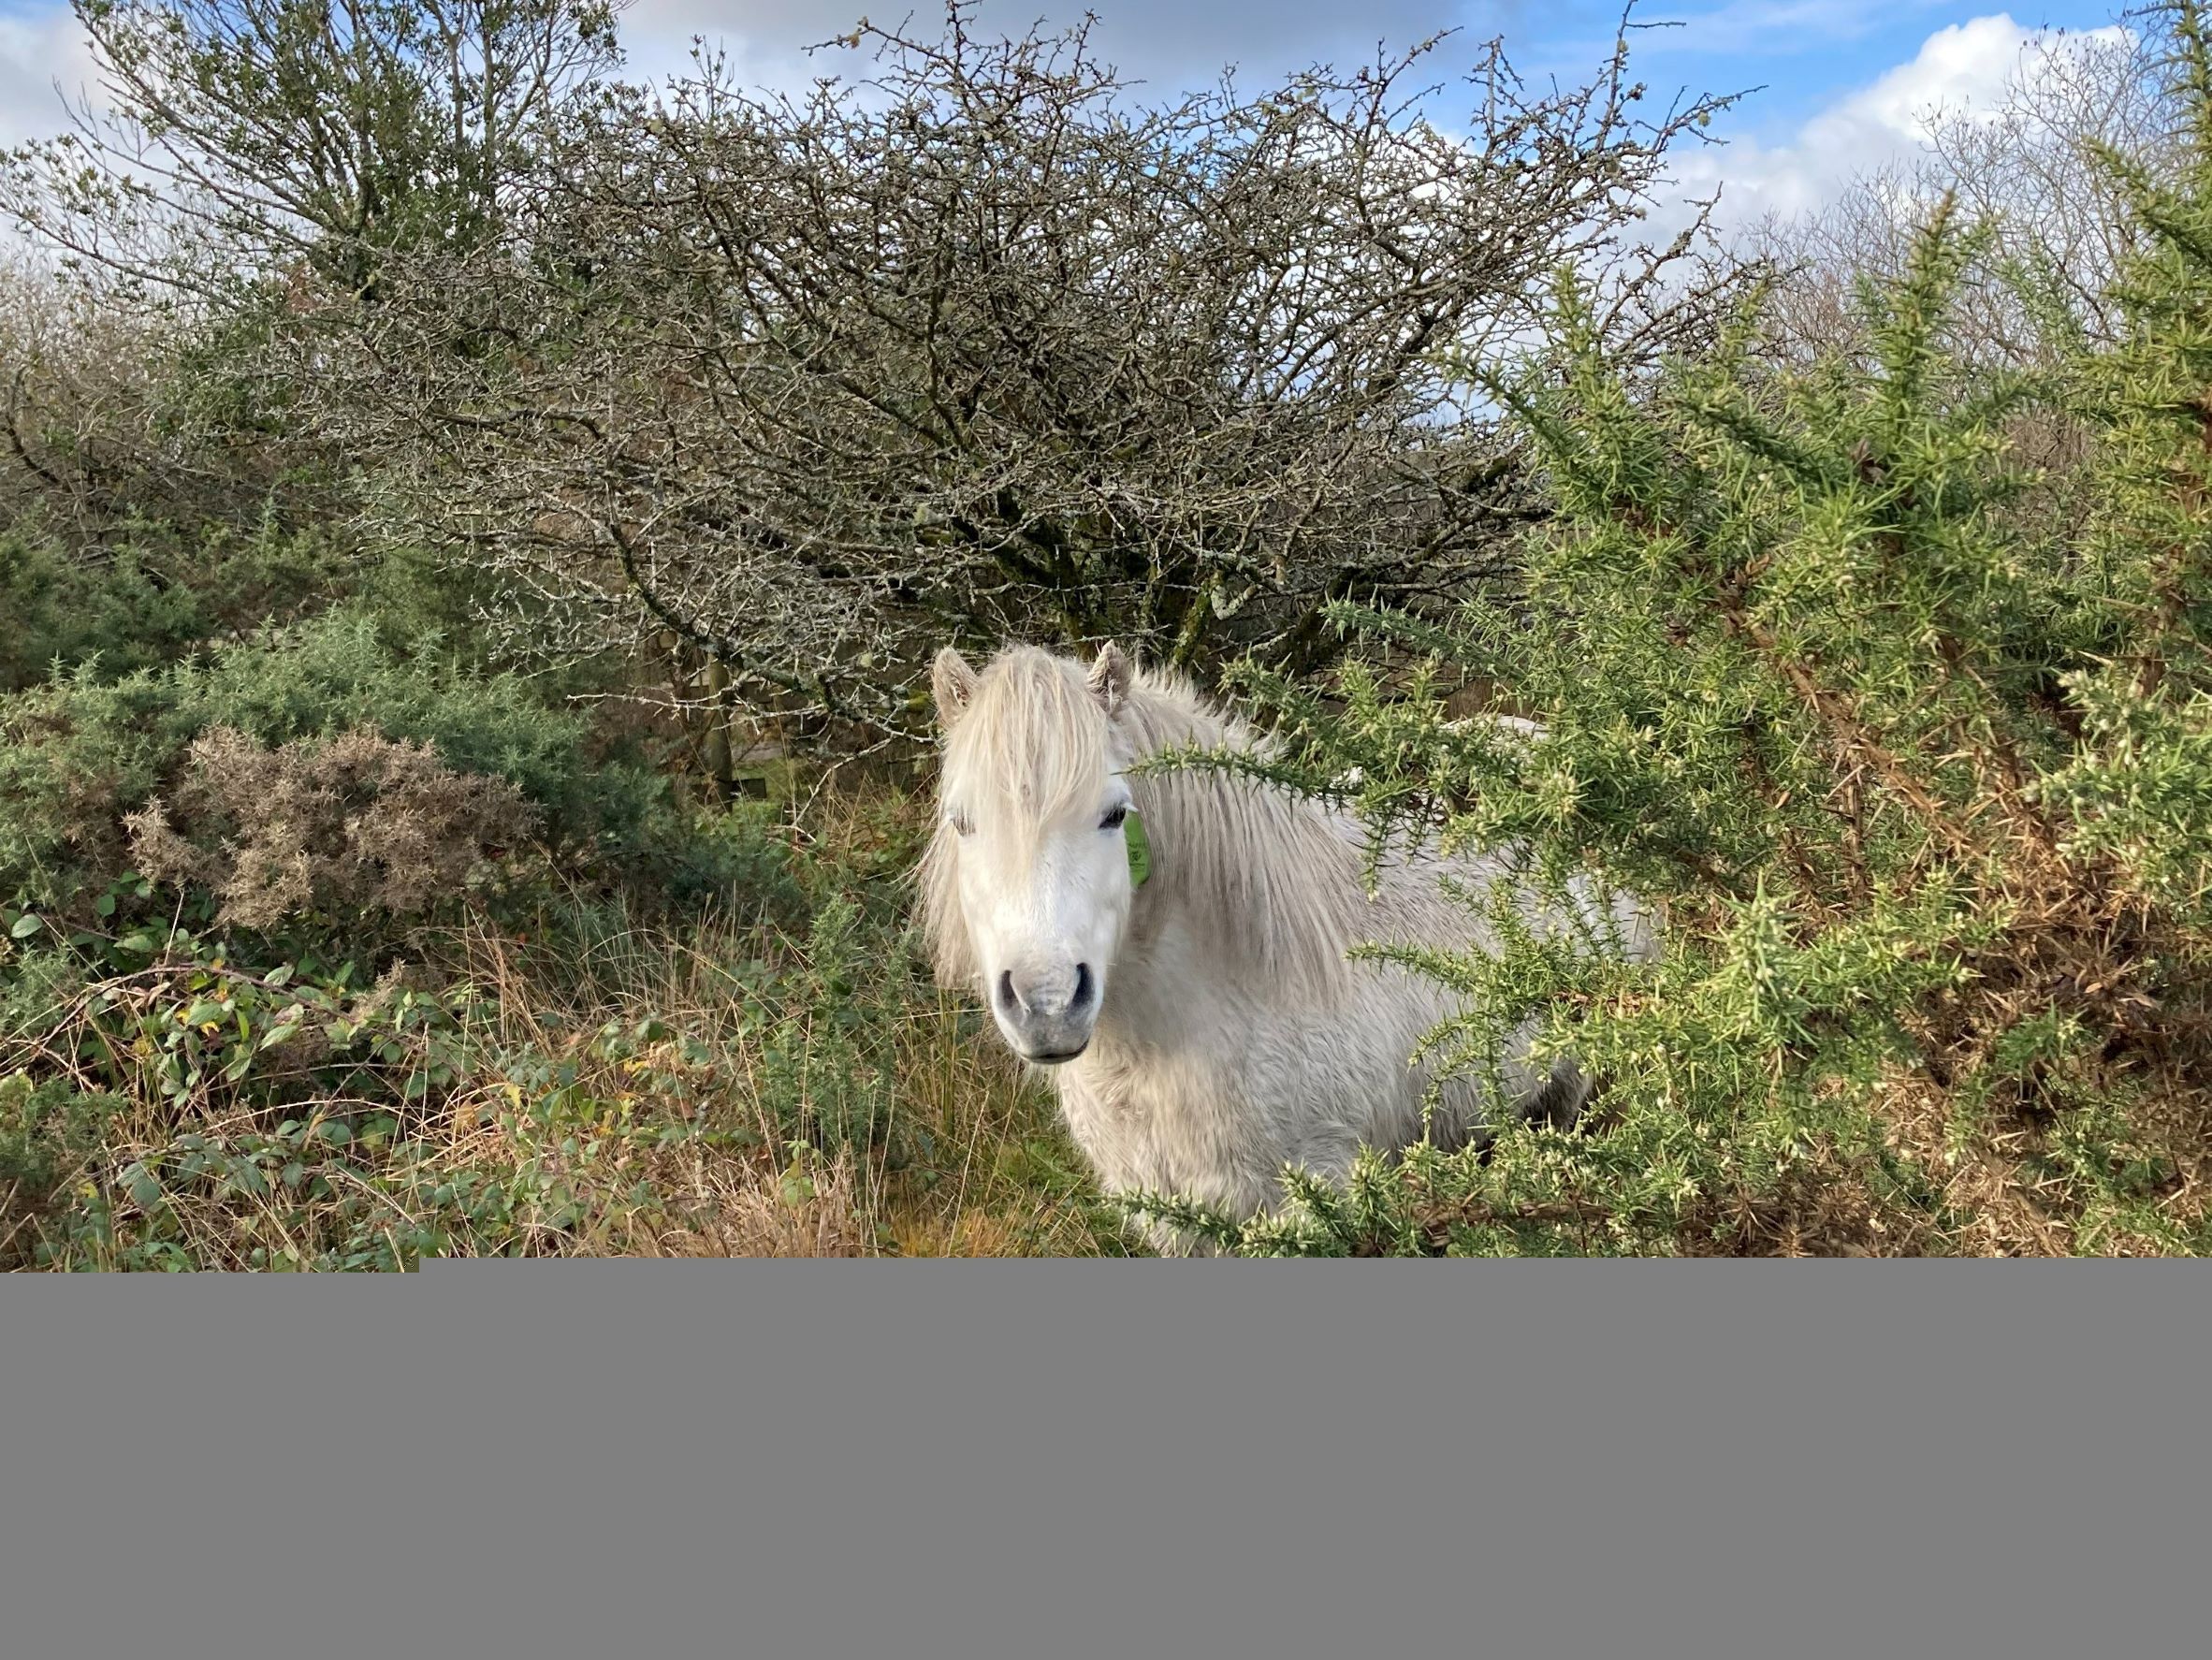 Green social prescribing events will continue like the popular walking tours of Goss Moor NNR to find and check on the wild ponies that live there